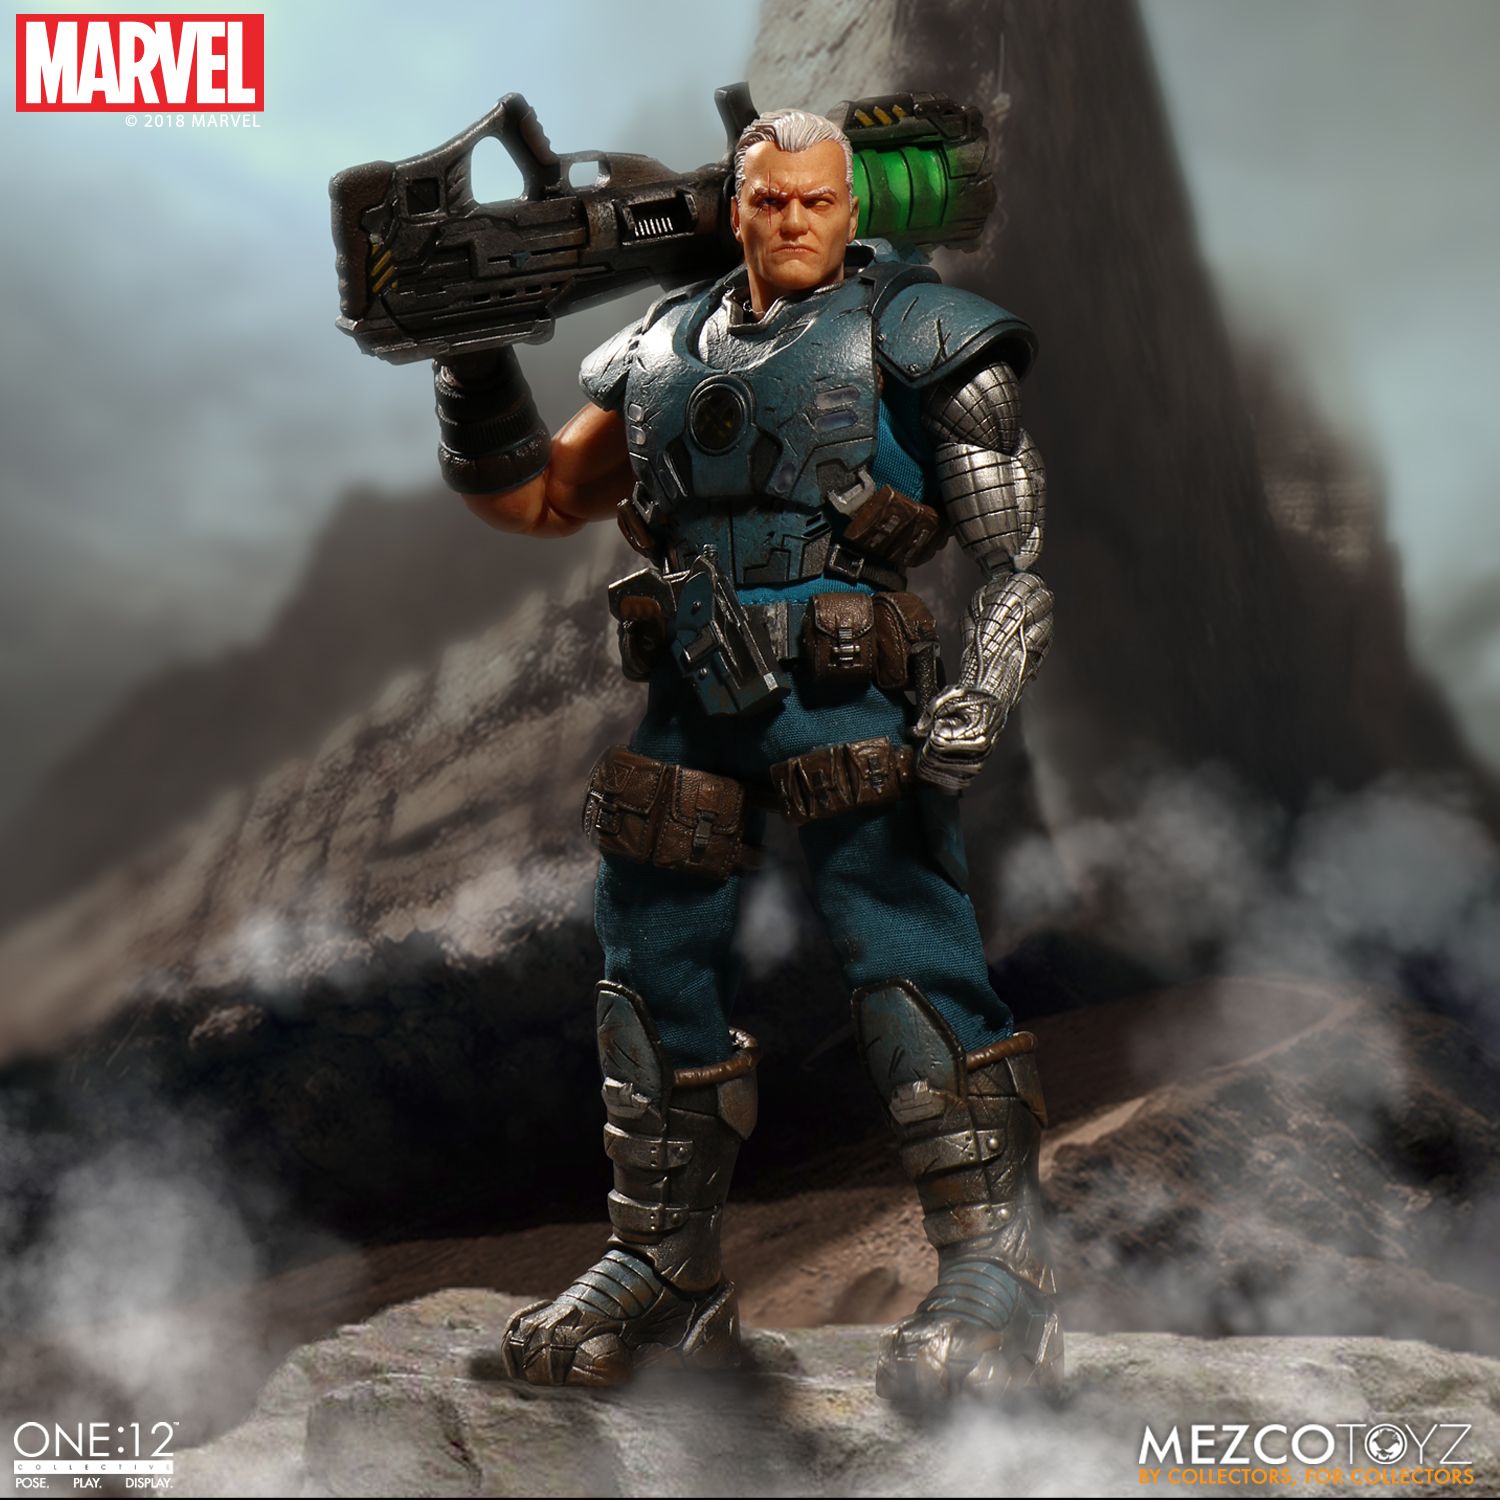 In STOCK Mezco One 12 Marvel Comics Cable Action Figure 